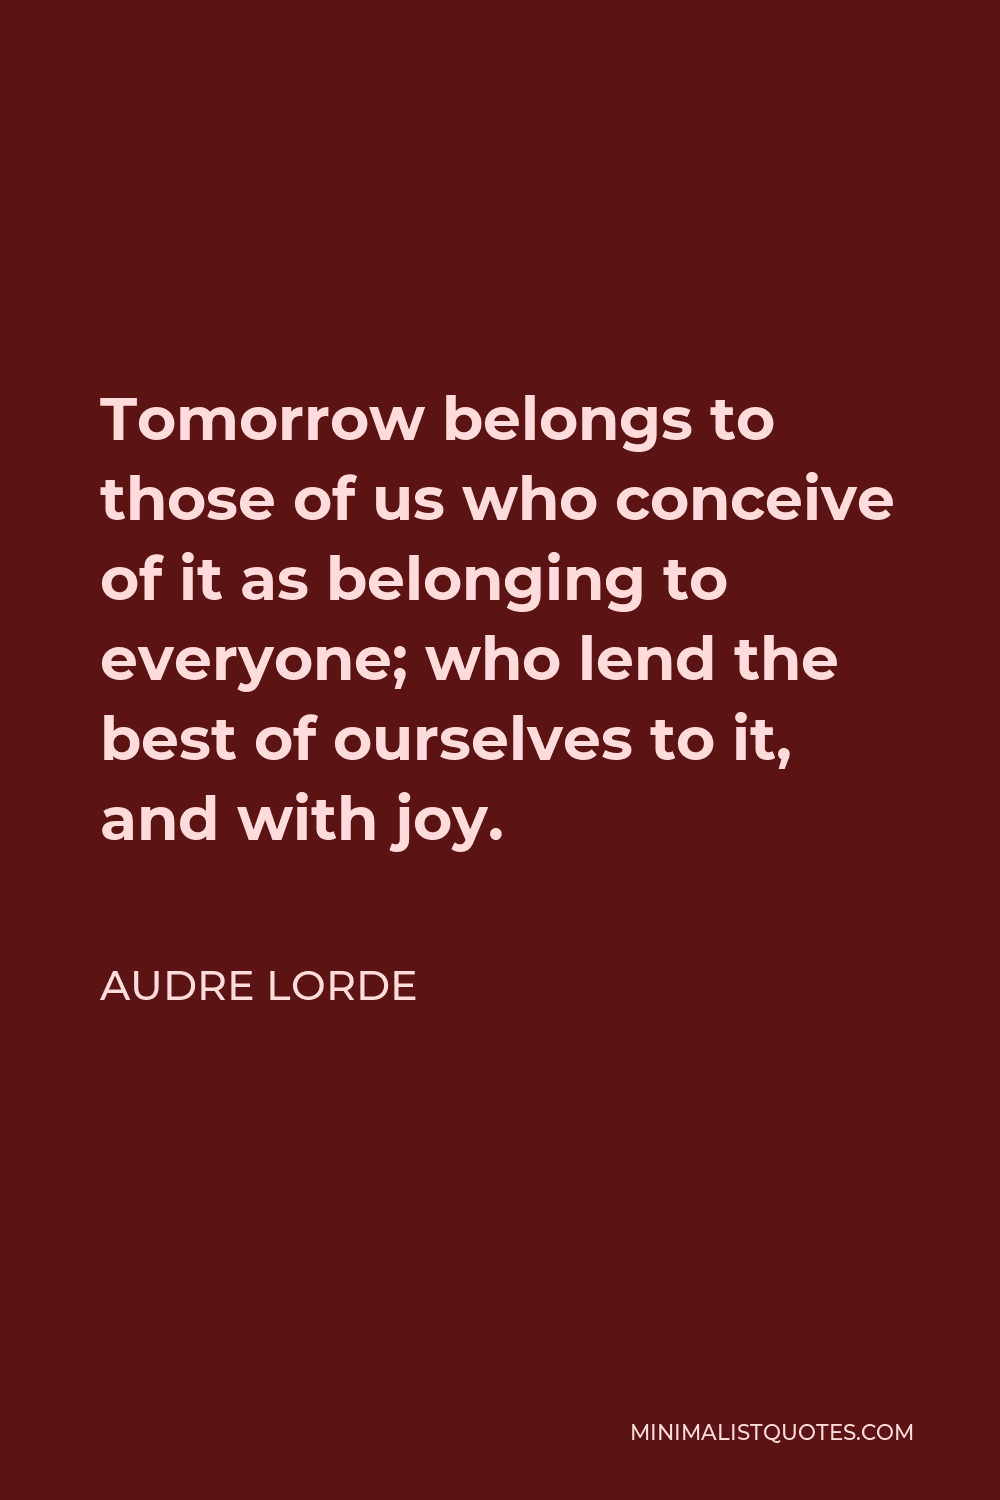 Audre Lorde Quote - Tomorrow belongs to those of us who conceive of it as belonging to everyone; who lend the best of ourselves to it, and with joy.